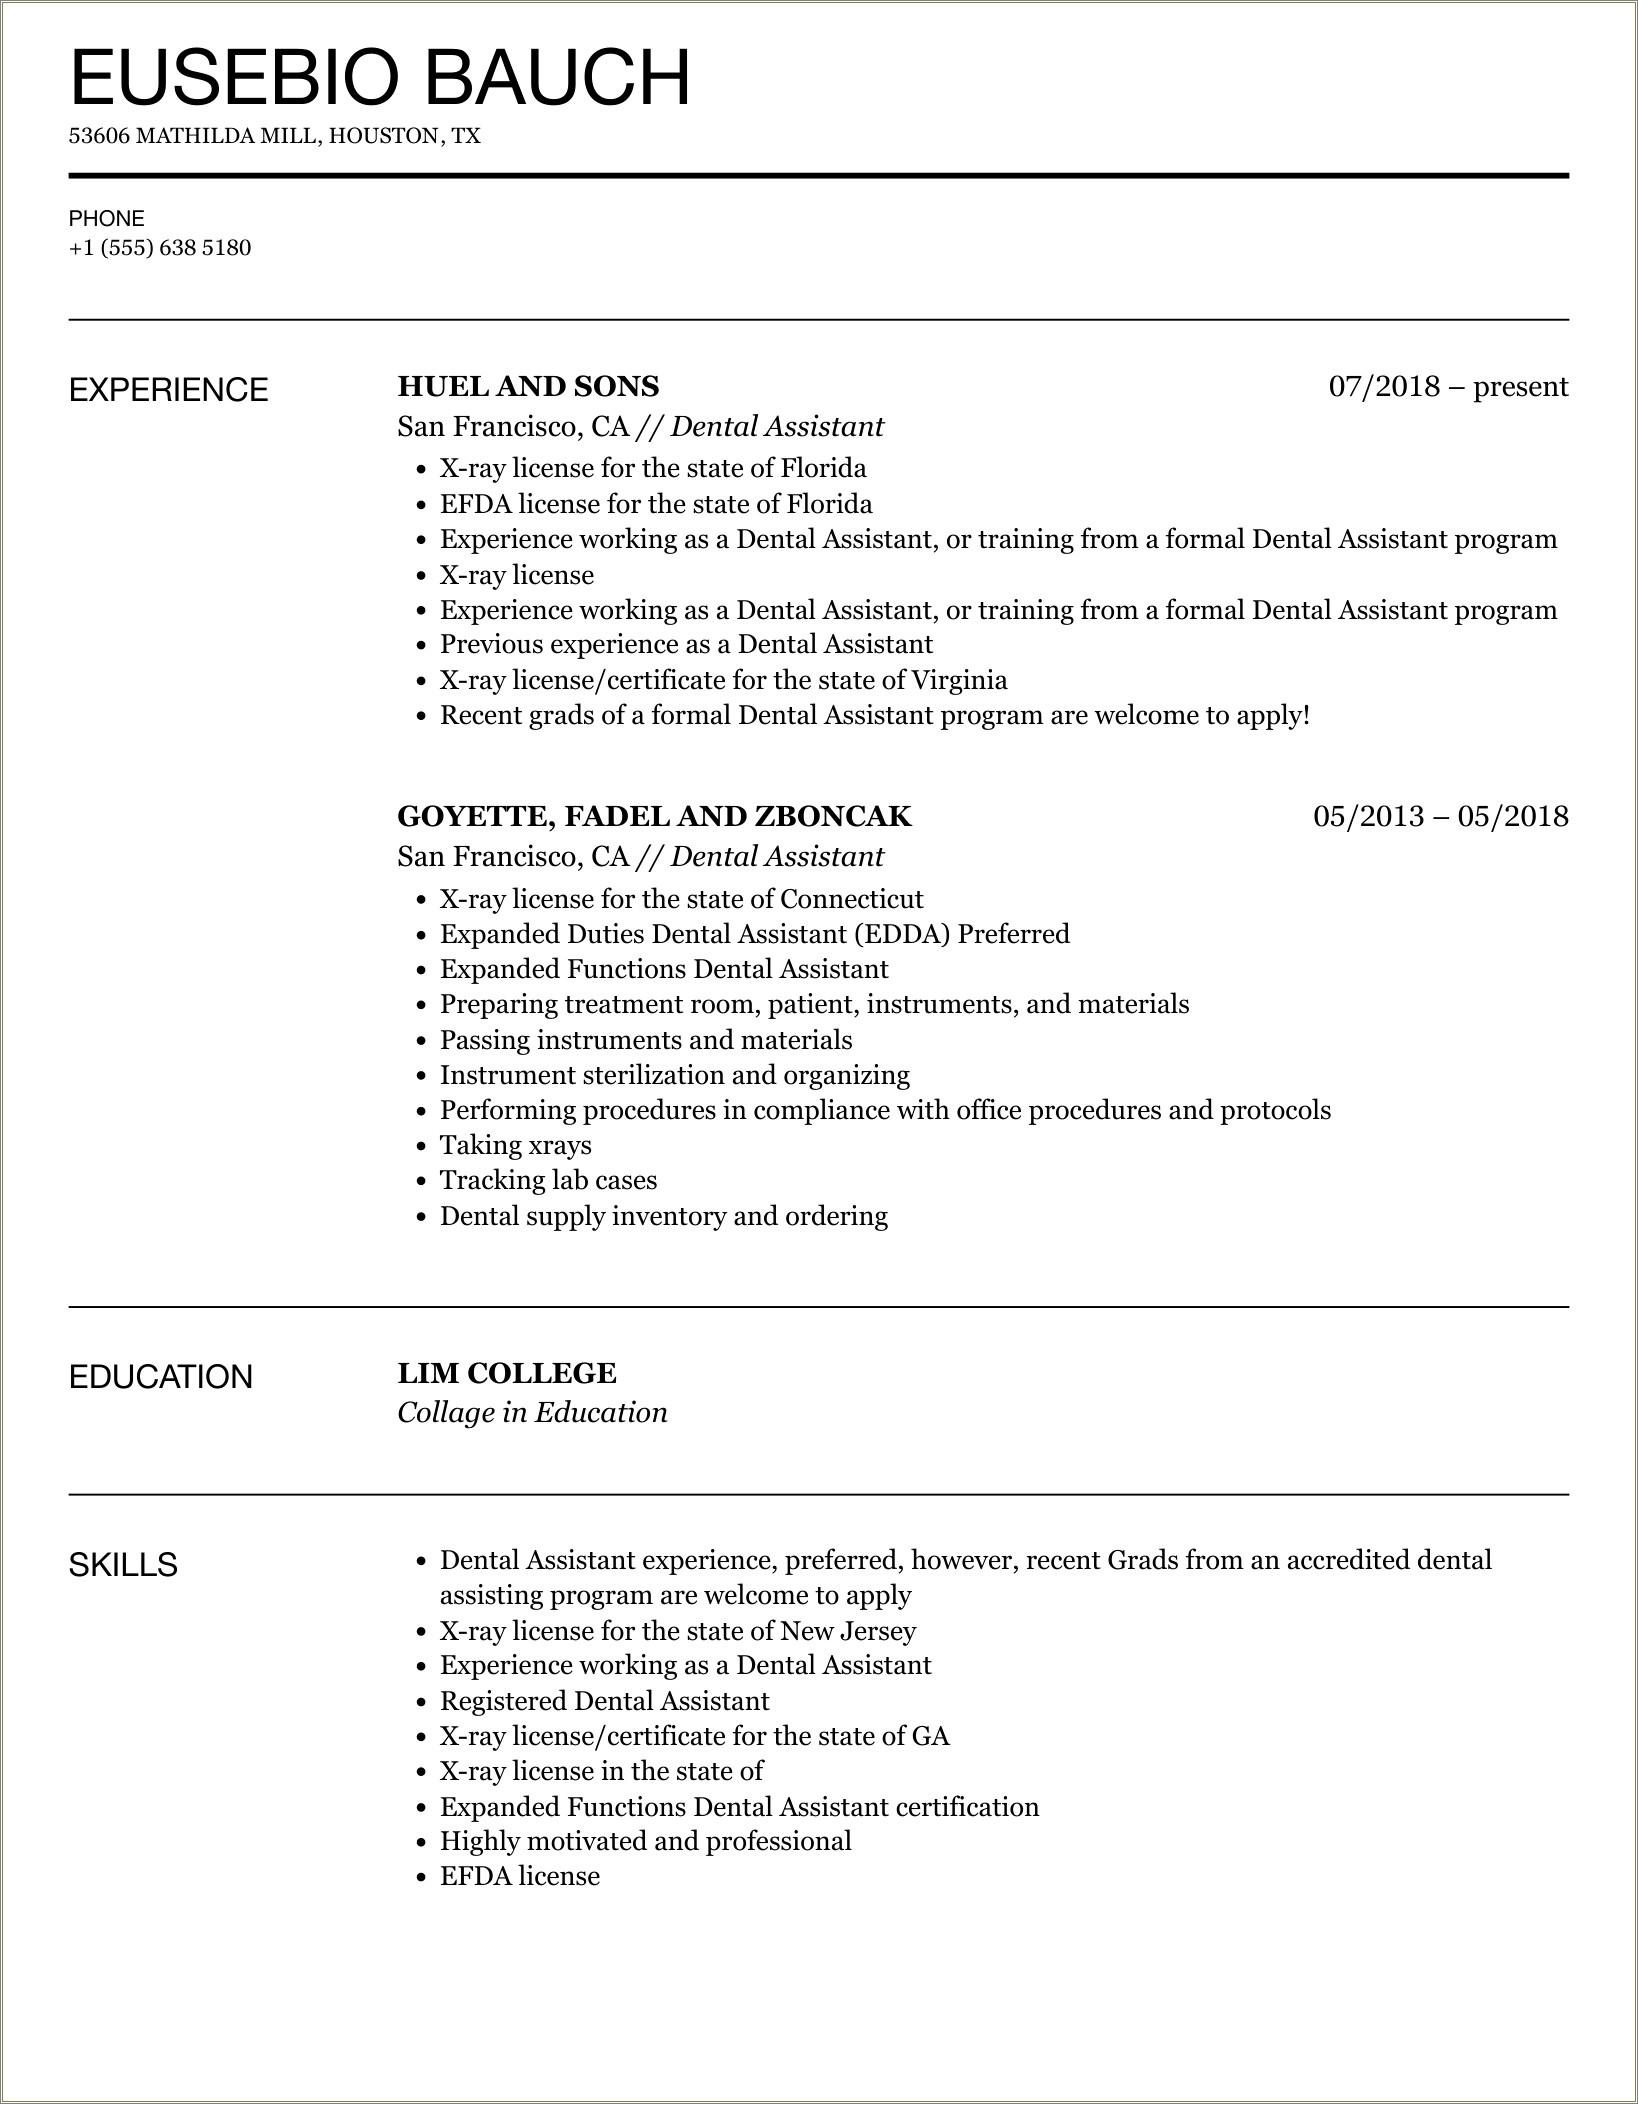 Resume Format For Jobs In New Jersey